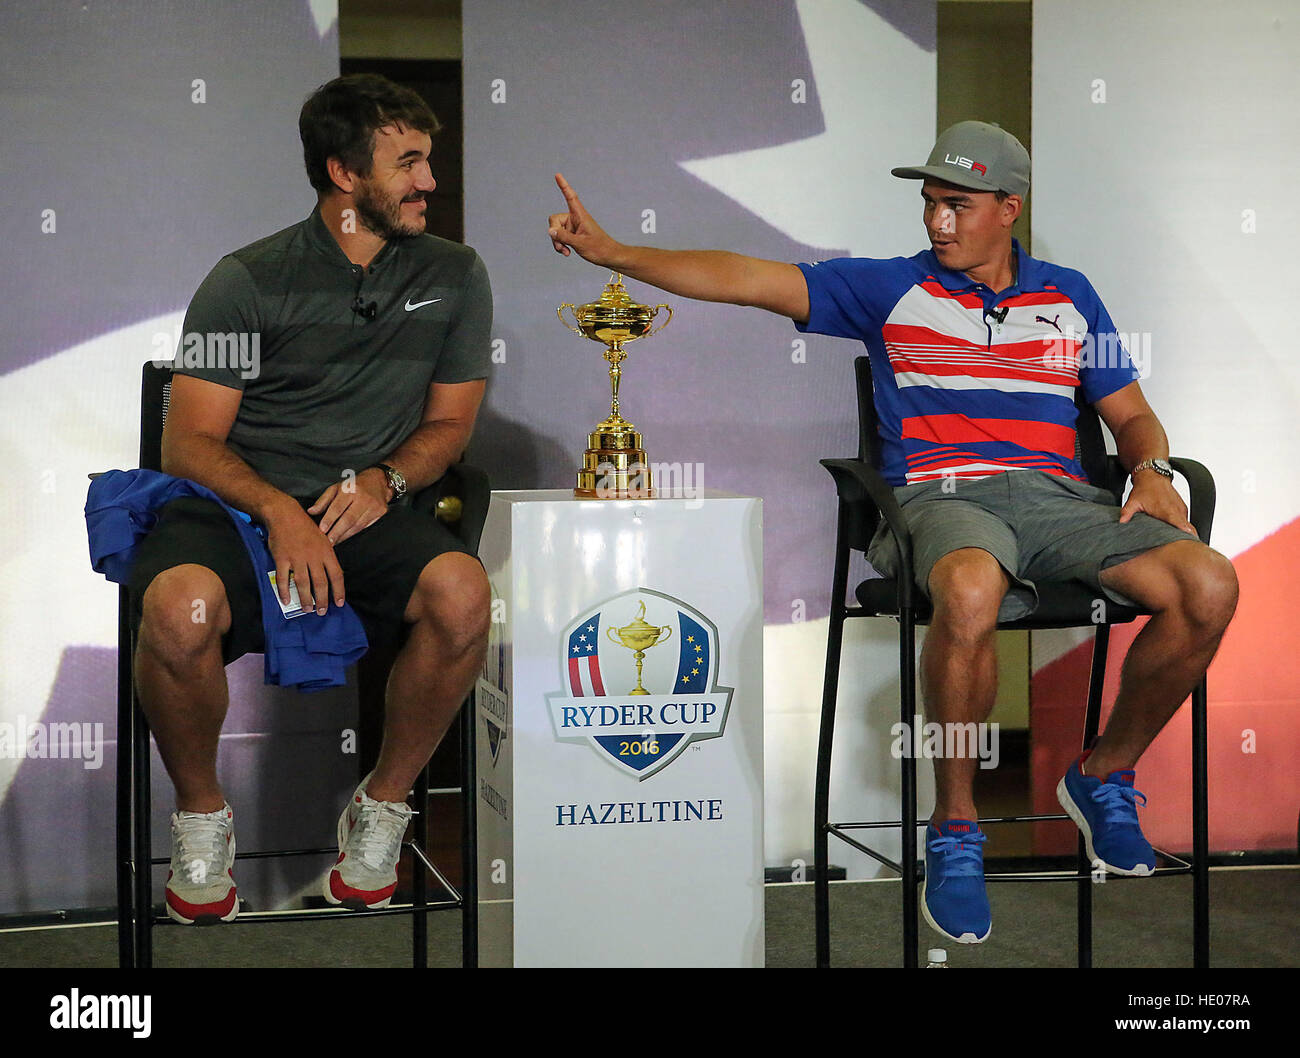 Palm Beach Gardens, Florida, USA. 18th Oct, 2016. U.S. Ryder Cup golfer RICKIE FOWLER (R) has some fun with his Ryder Cup teammate, BROOKS KOEPKA, a former Cardinal Newman grad, during a Trophy celebration at PGA Headquarters in Palm Beach Gardens Tuesday, October 18, 2016. (Credit Image: © Allen Eyestone/The Palm Beach Post via ZUMA Press) Stock Photo